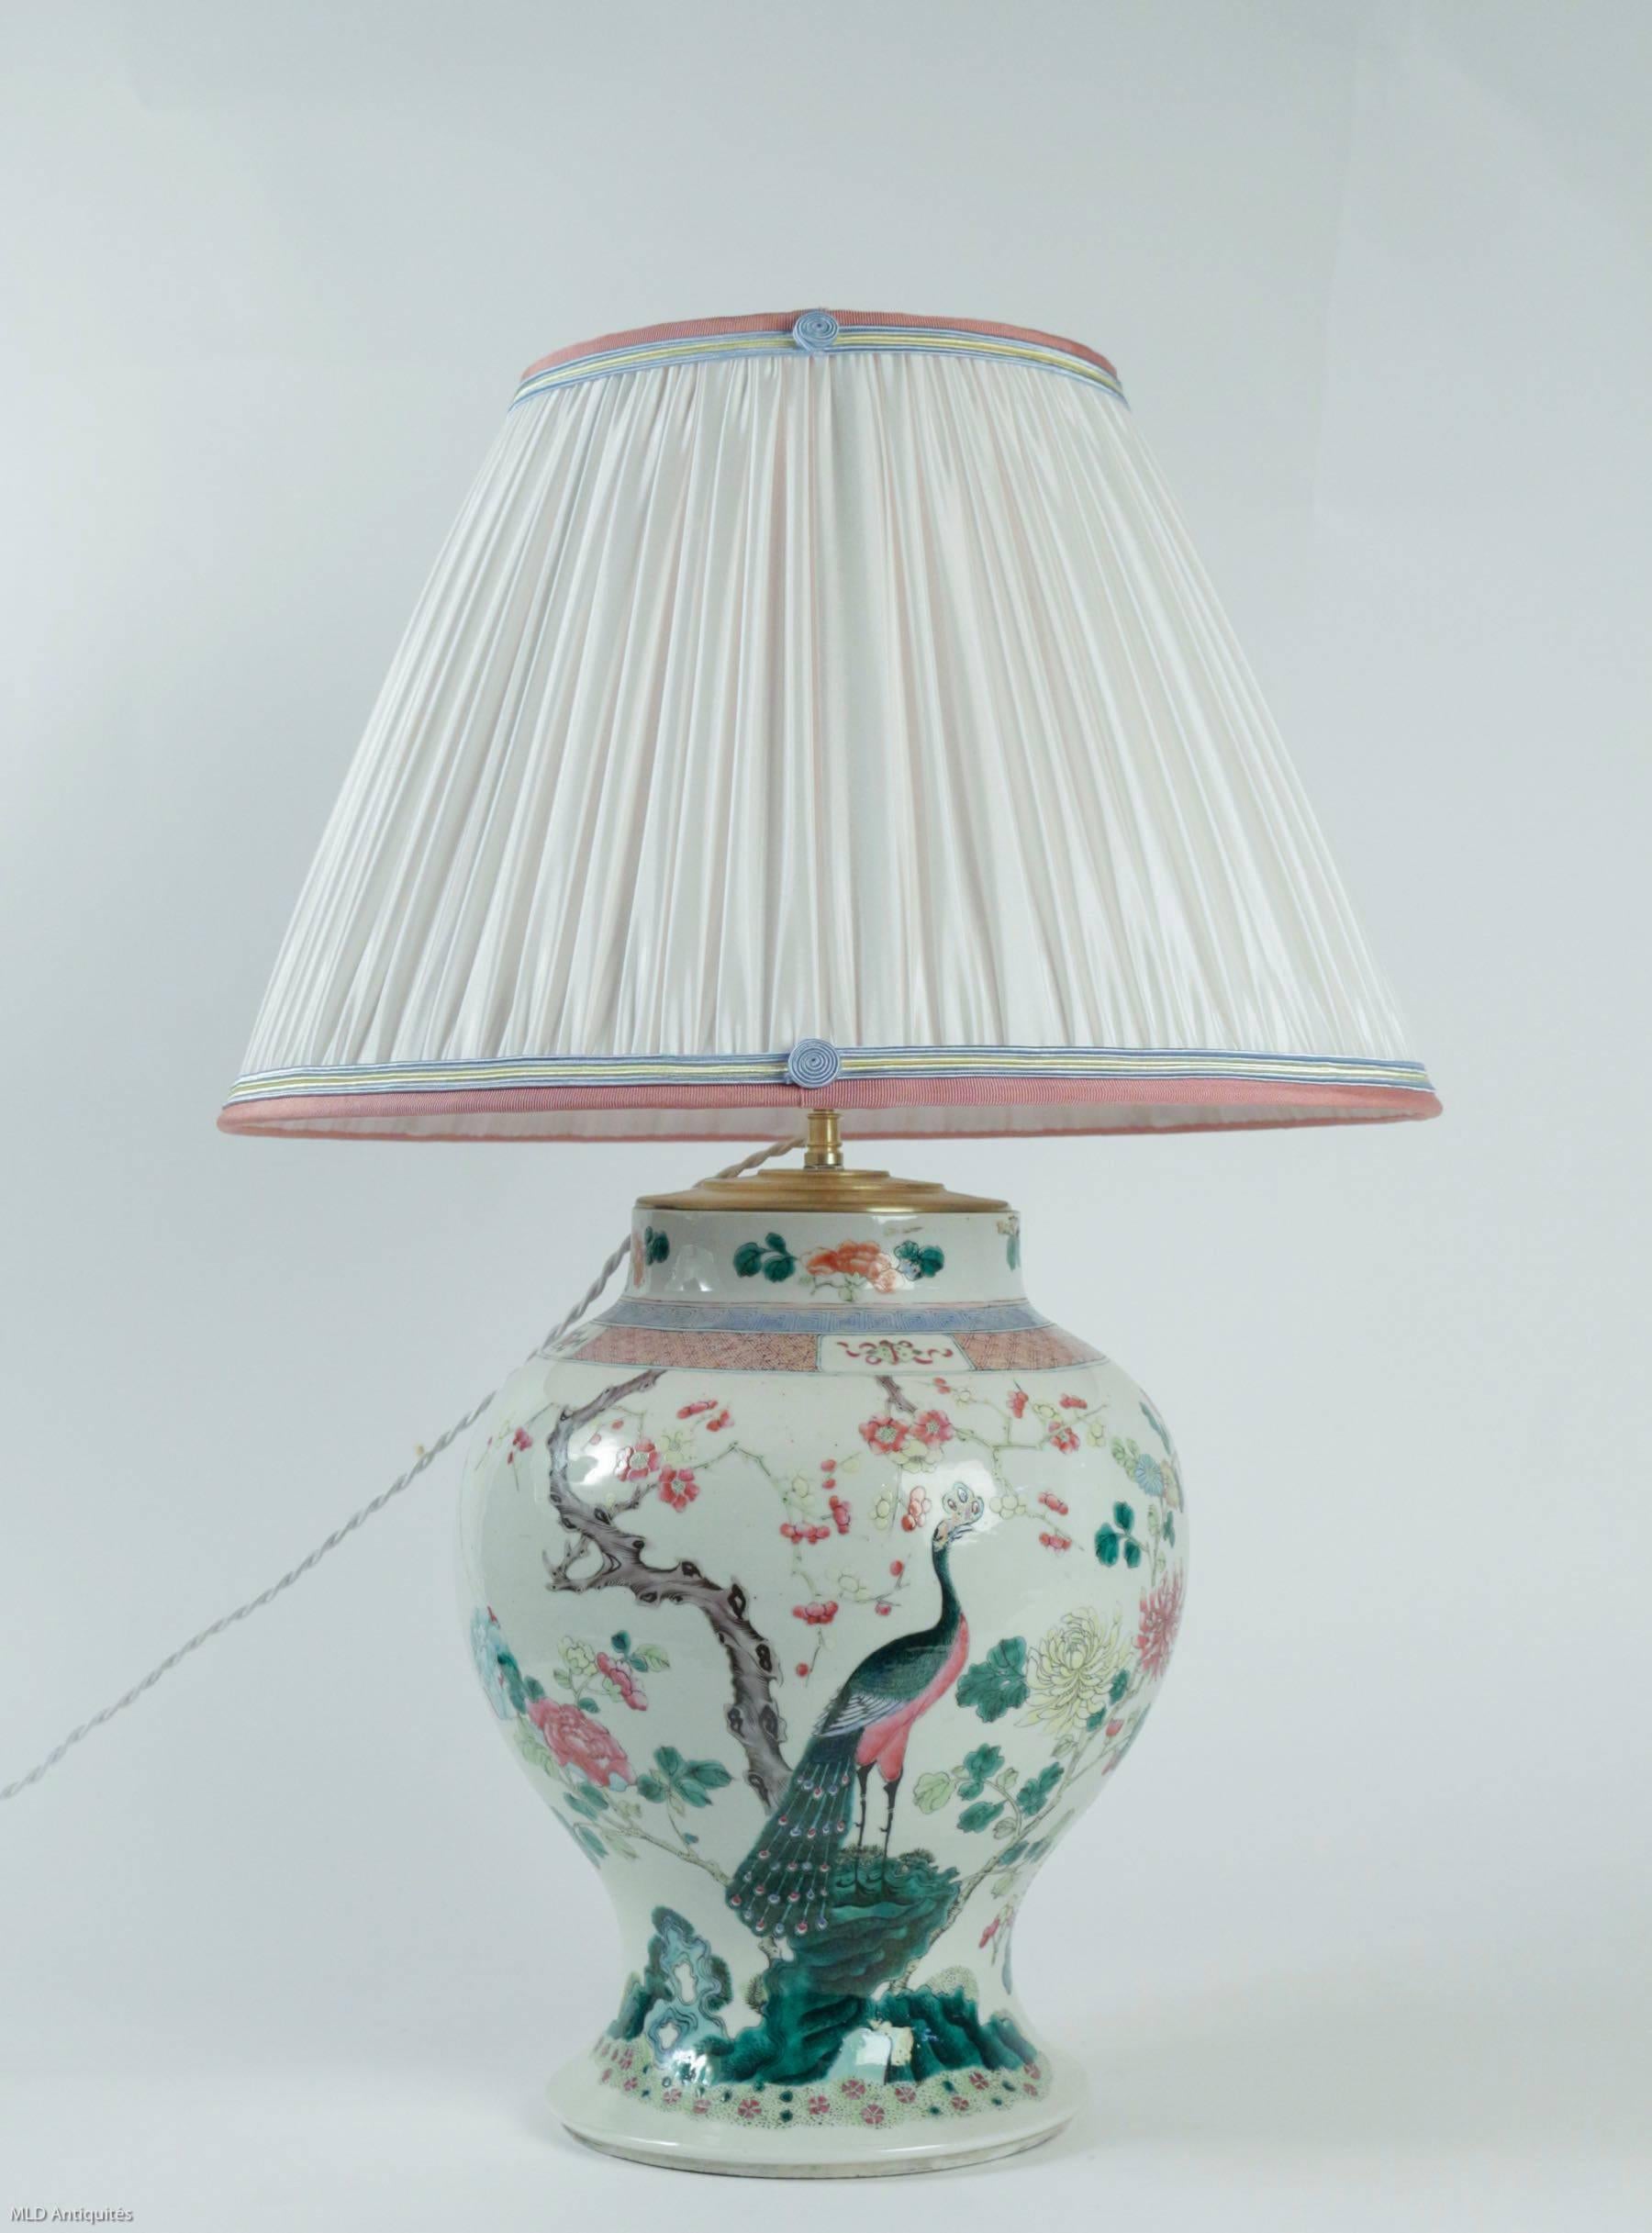 Lovely green family Chinese covered jar with two original different sides with peacock and rooster drawings, converted to table lamps, with new French pleated white and pink silk lamp shades.

Beautiful Chinese vase, late 19th century, circa